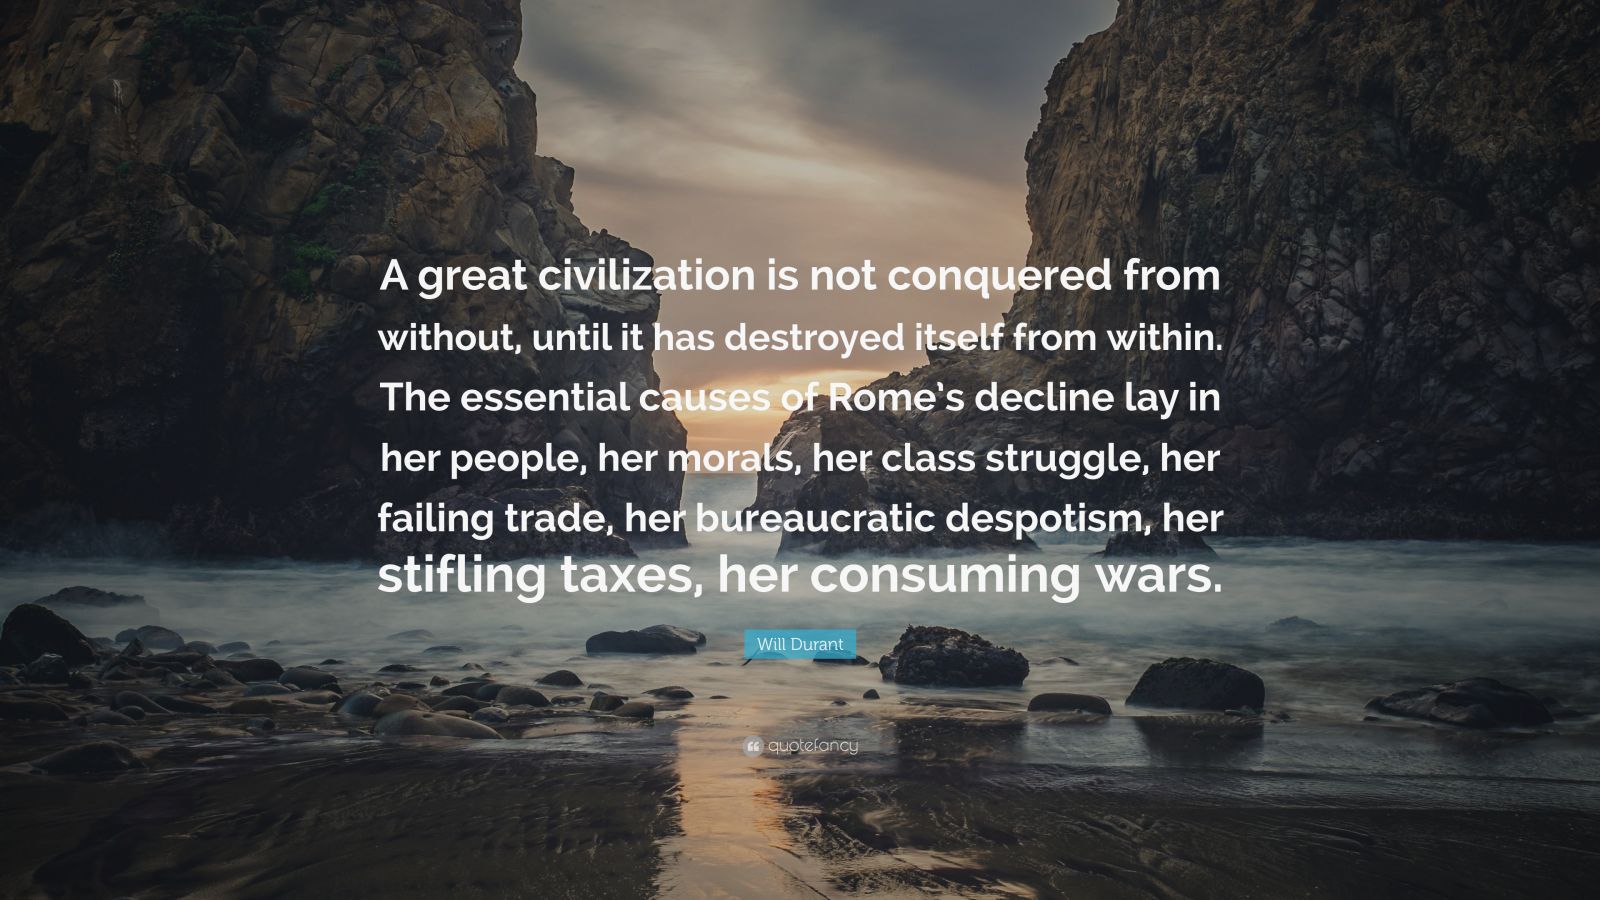 Will Durant Quote: “A great civilization is not conquered from without